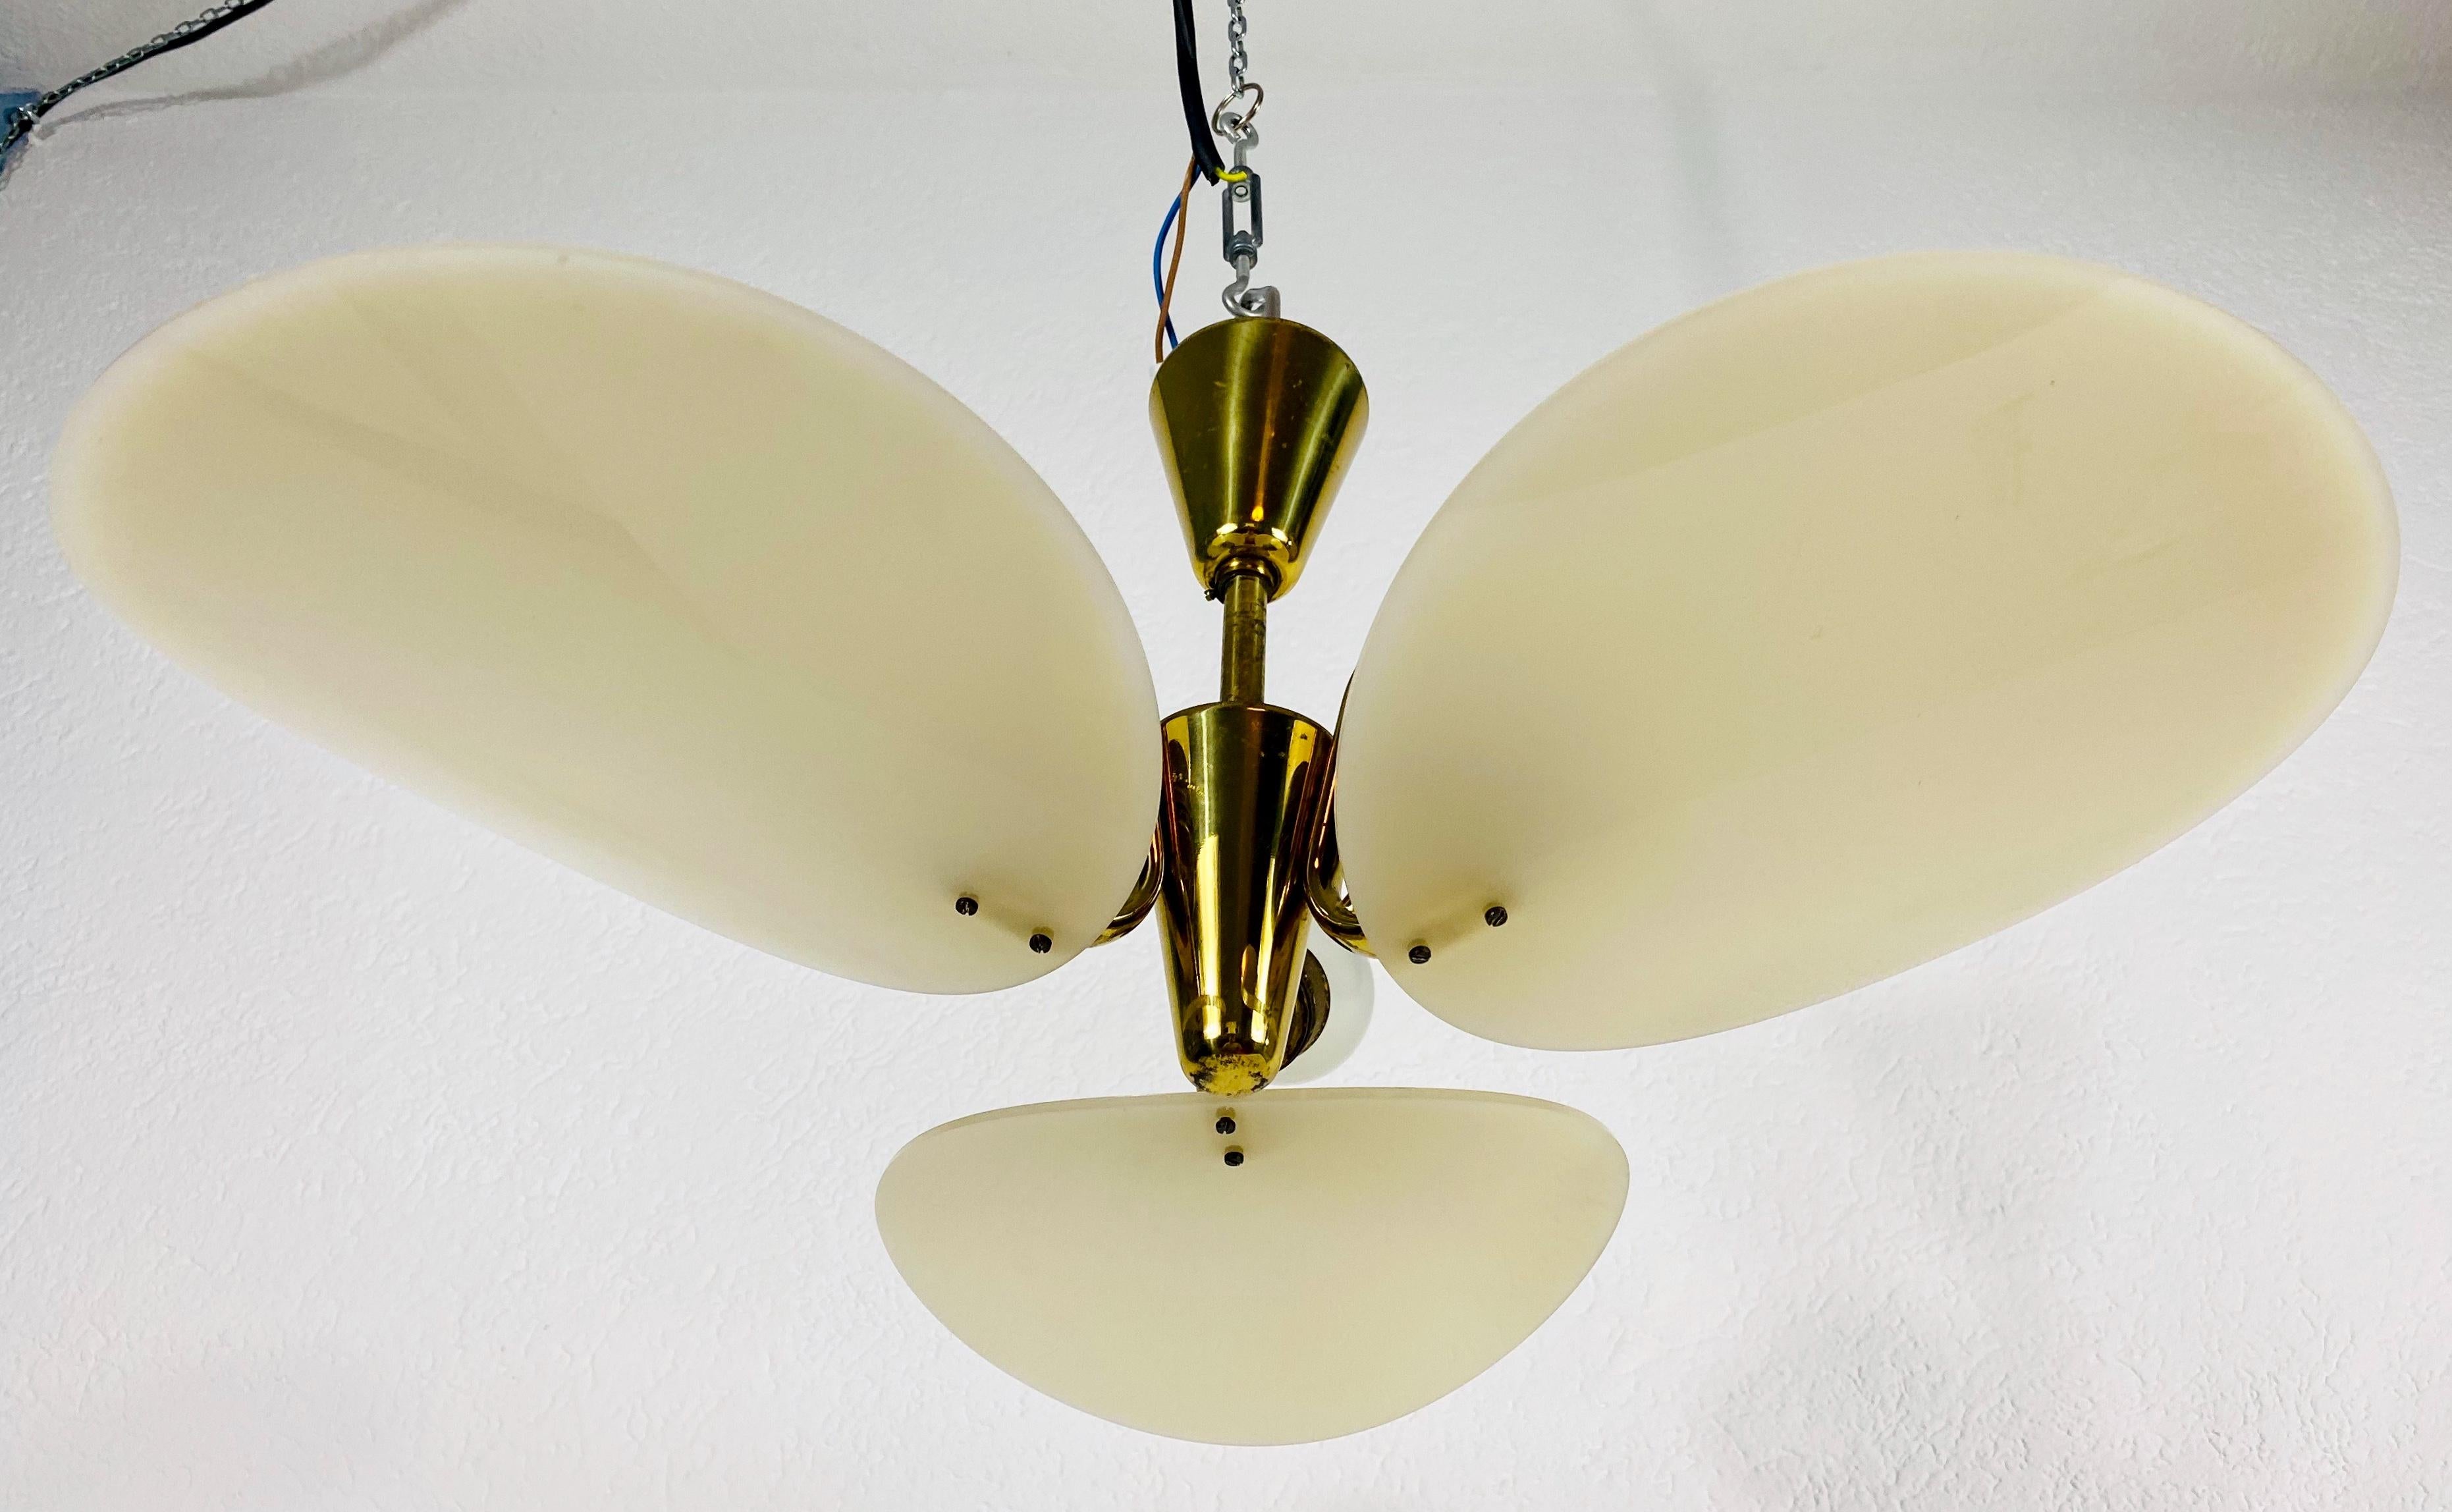 A very rare chandelier made in Italy in the 1950s in the style Stilnovo. It is fascinating with its 3 brass arms, each of it with an acrylic glass shade. The arms have a beige color.

Very good vintage condition.

The light requires 3 E14 light